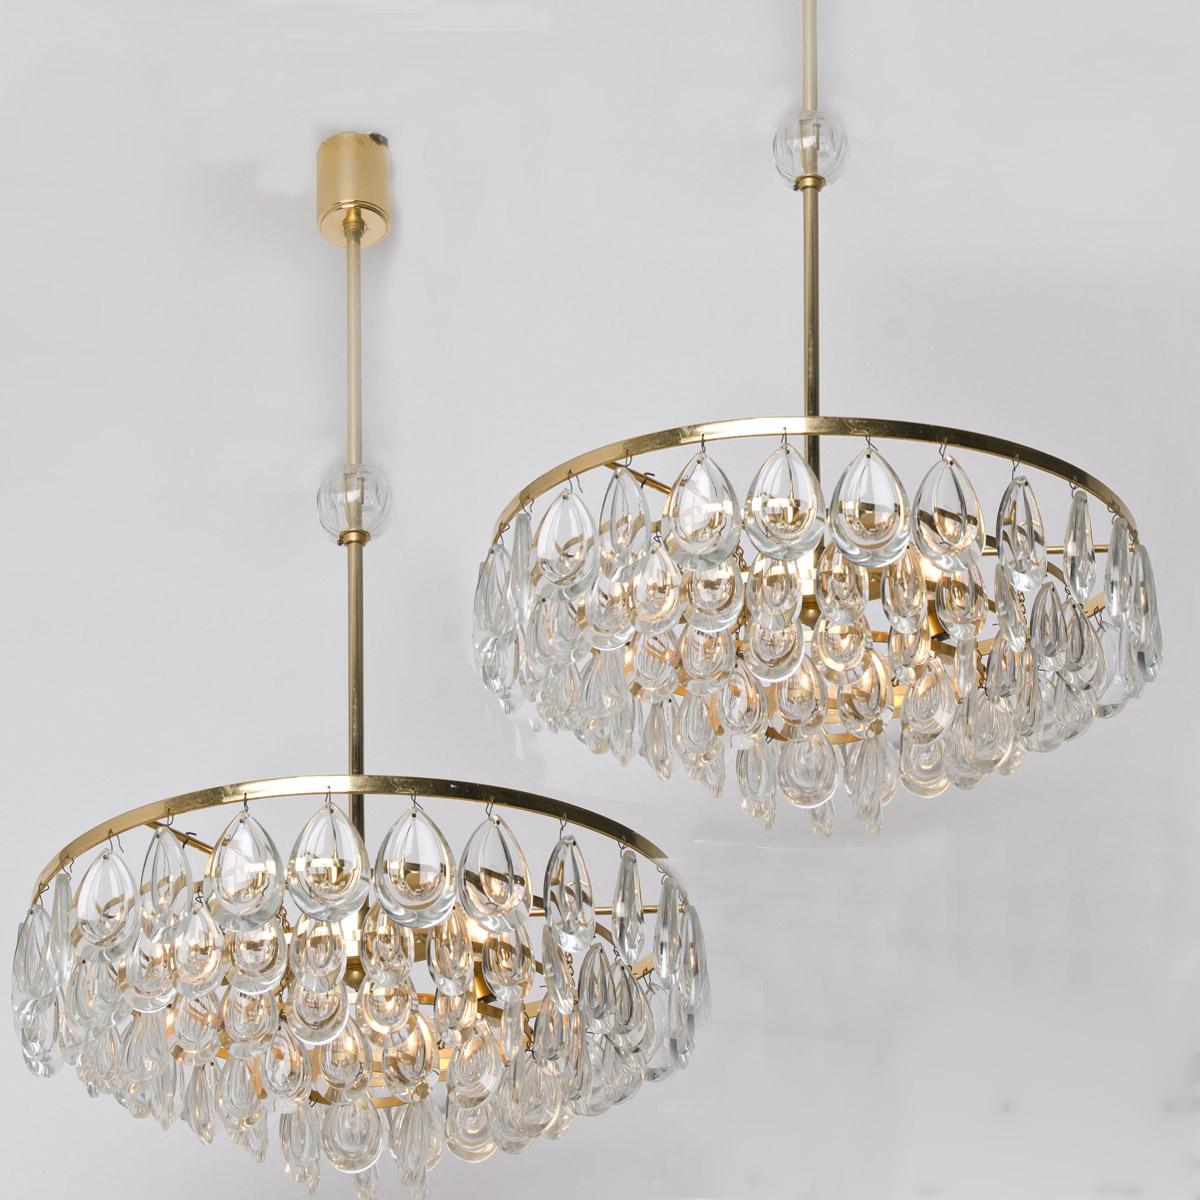 Wonderful pair of gilded brass and faceted crystal chandeliers by Palwa, Germany, manufactured in midcentury. Minimalistic design executed with a taste for excellence in craftsmanship. The glass bulb on the rod can be removed if